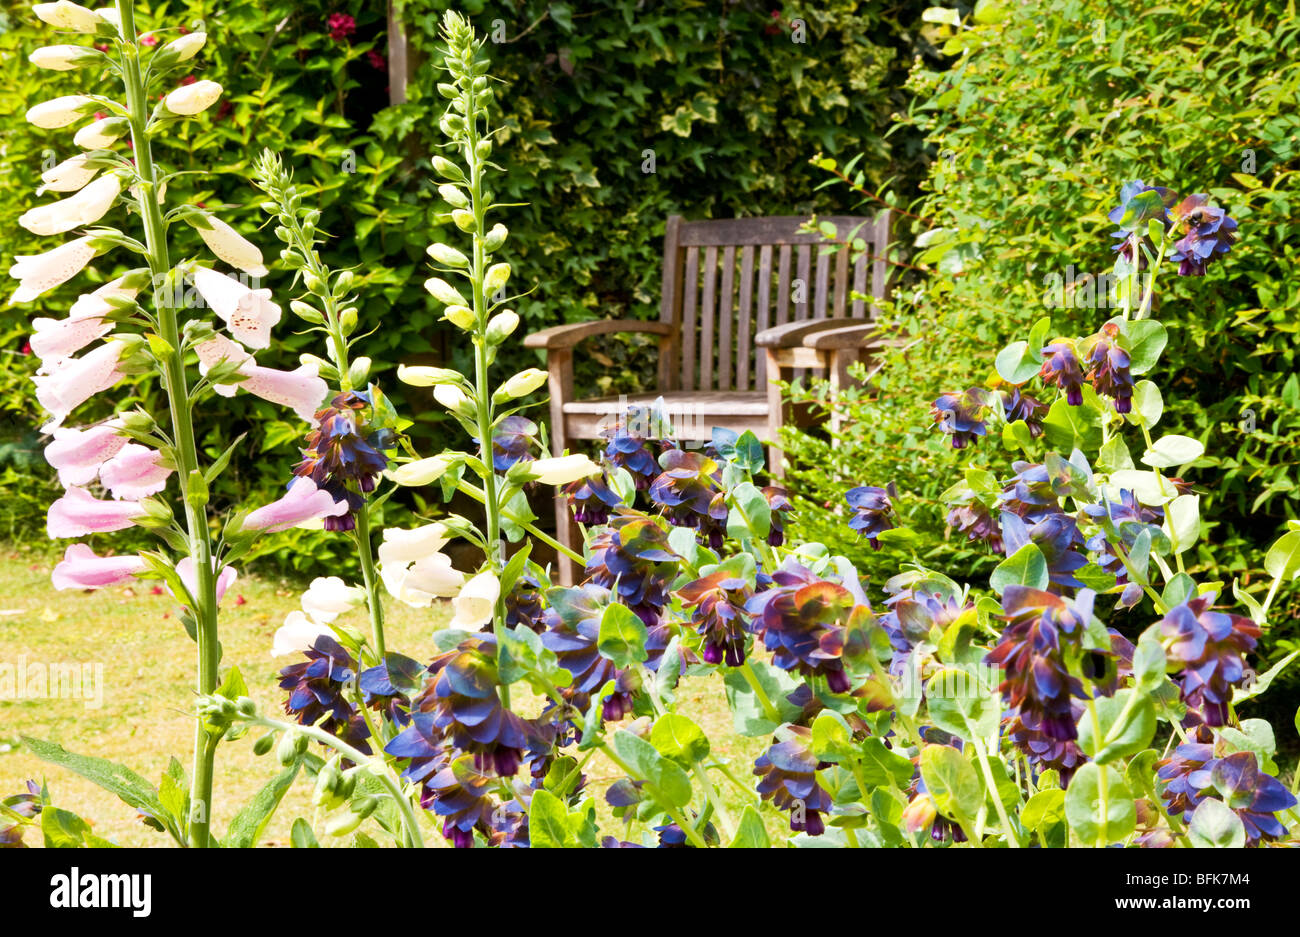 Foxgloves and Cerinthe Major Purpurascens or Honeywort in a small English garden with wooden seat in the background Stock Photo